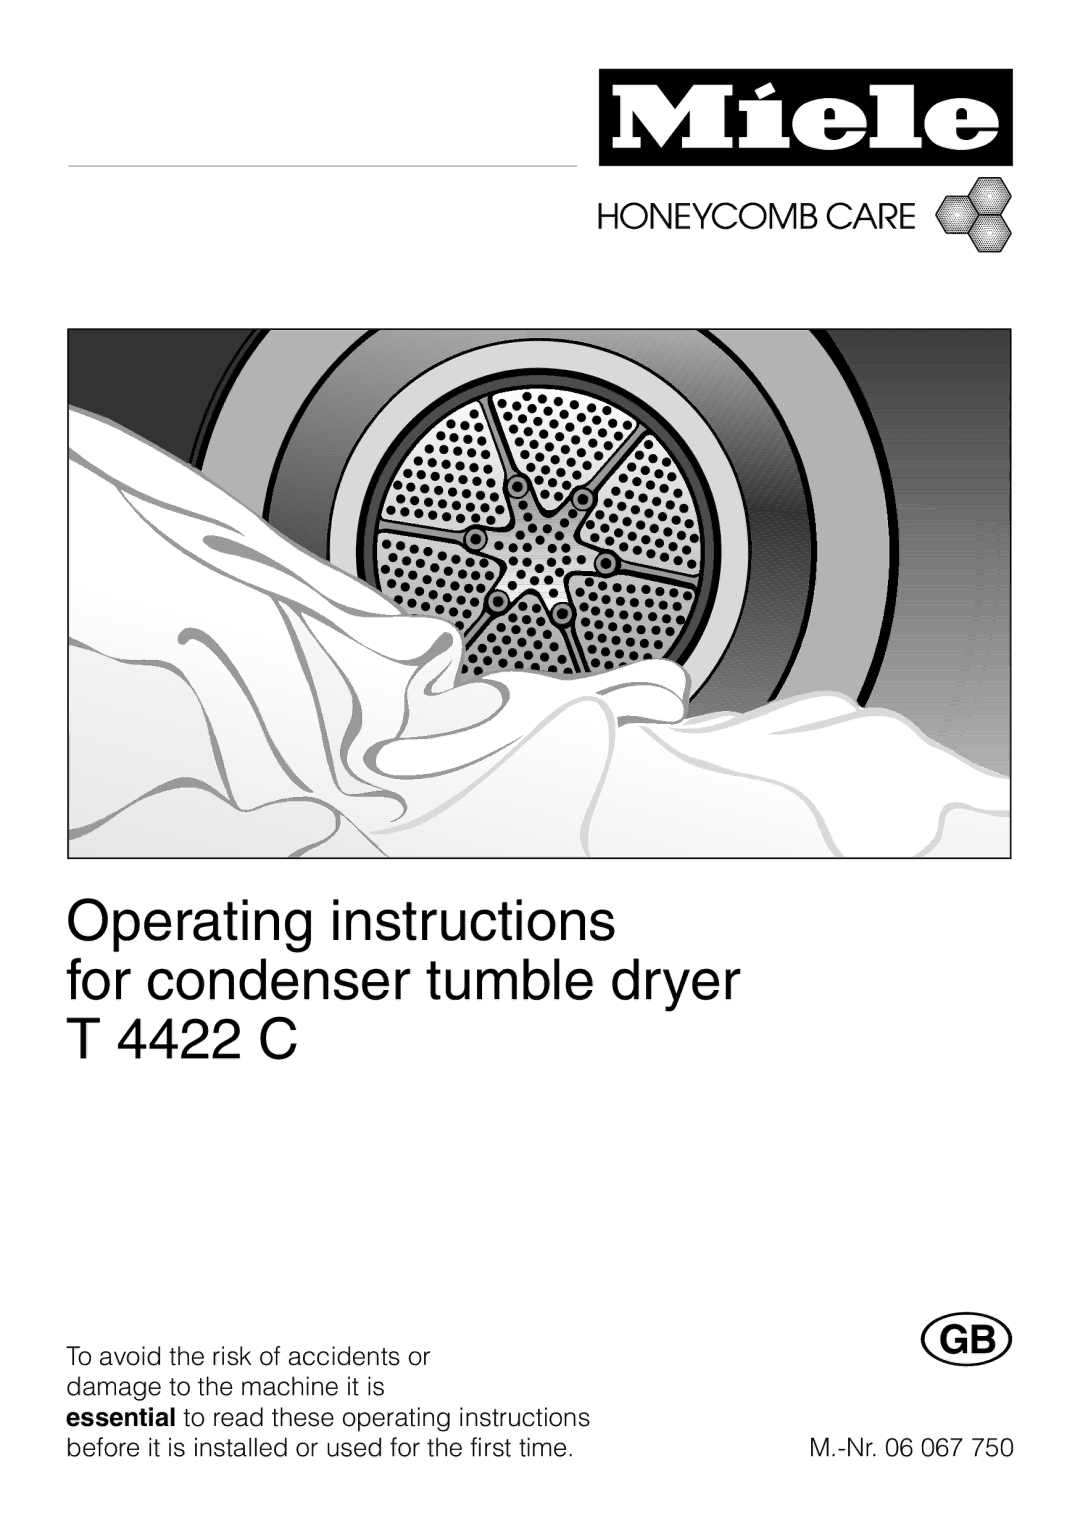 Miele operating instructions Operating instructions For condenser tumble dryer T 4422 C 